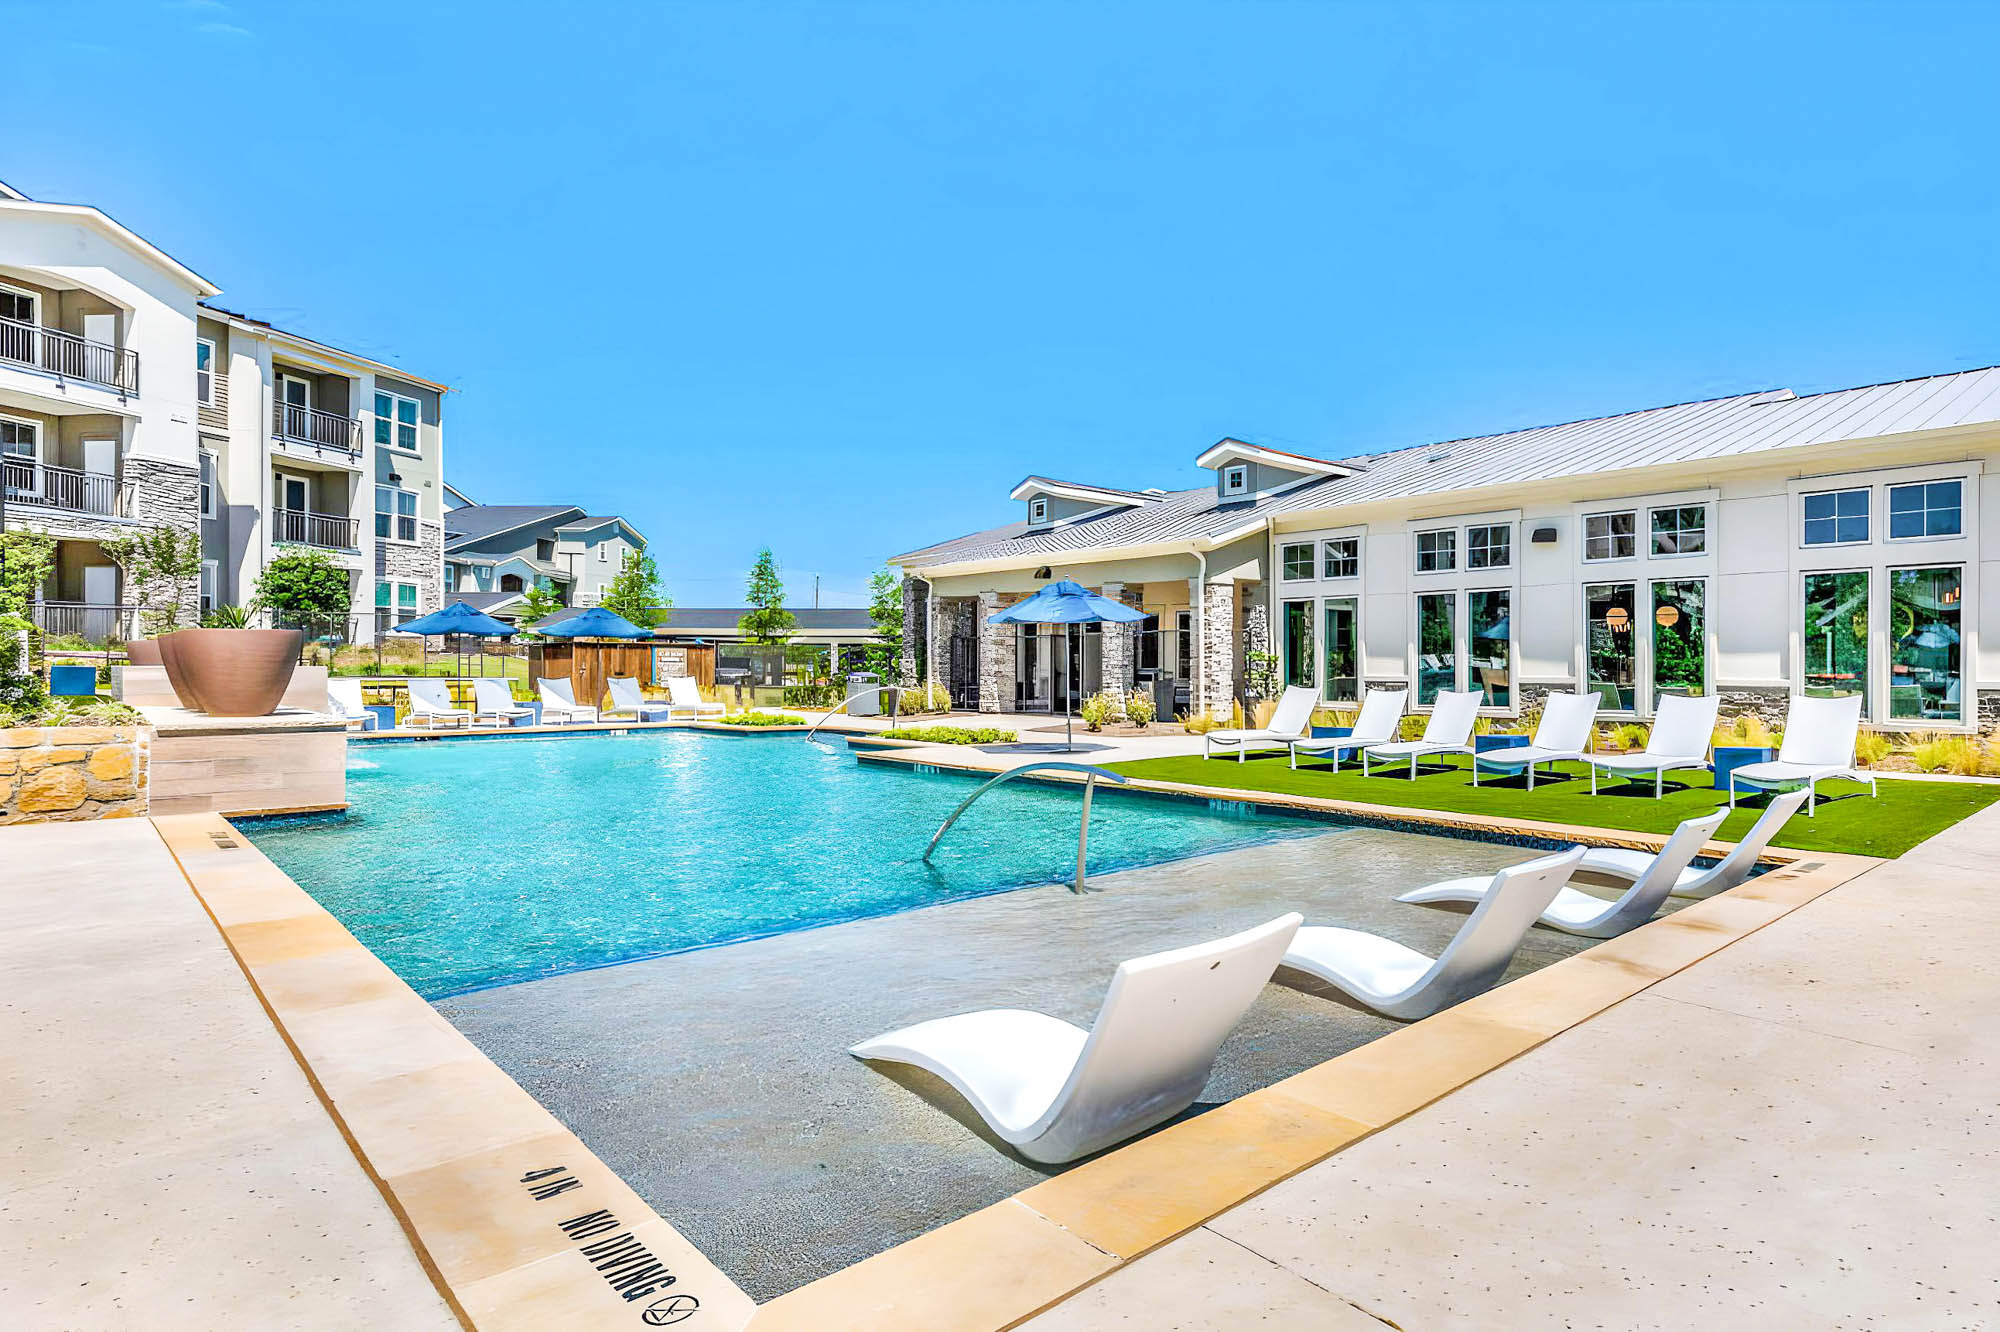 The pool at Embree Hill apartments in Dallas, TX.